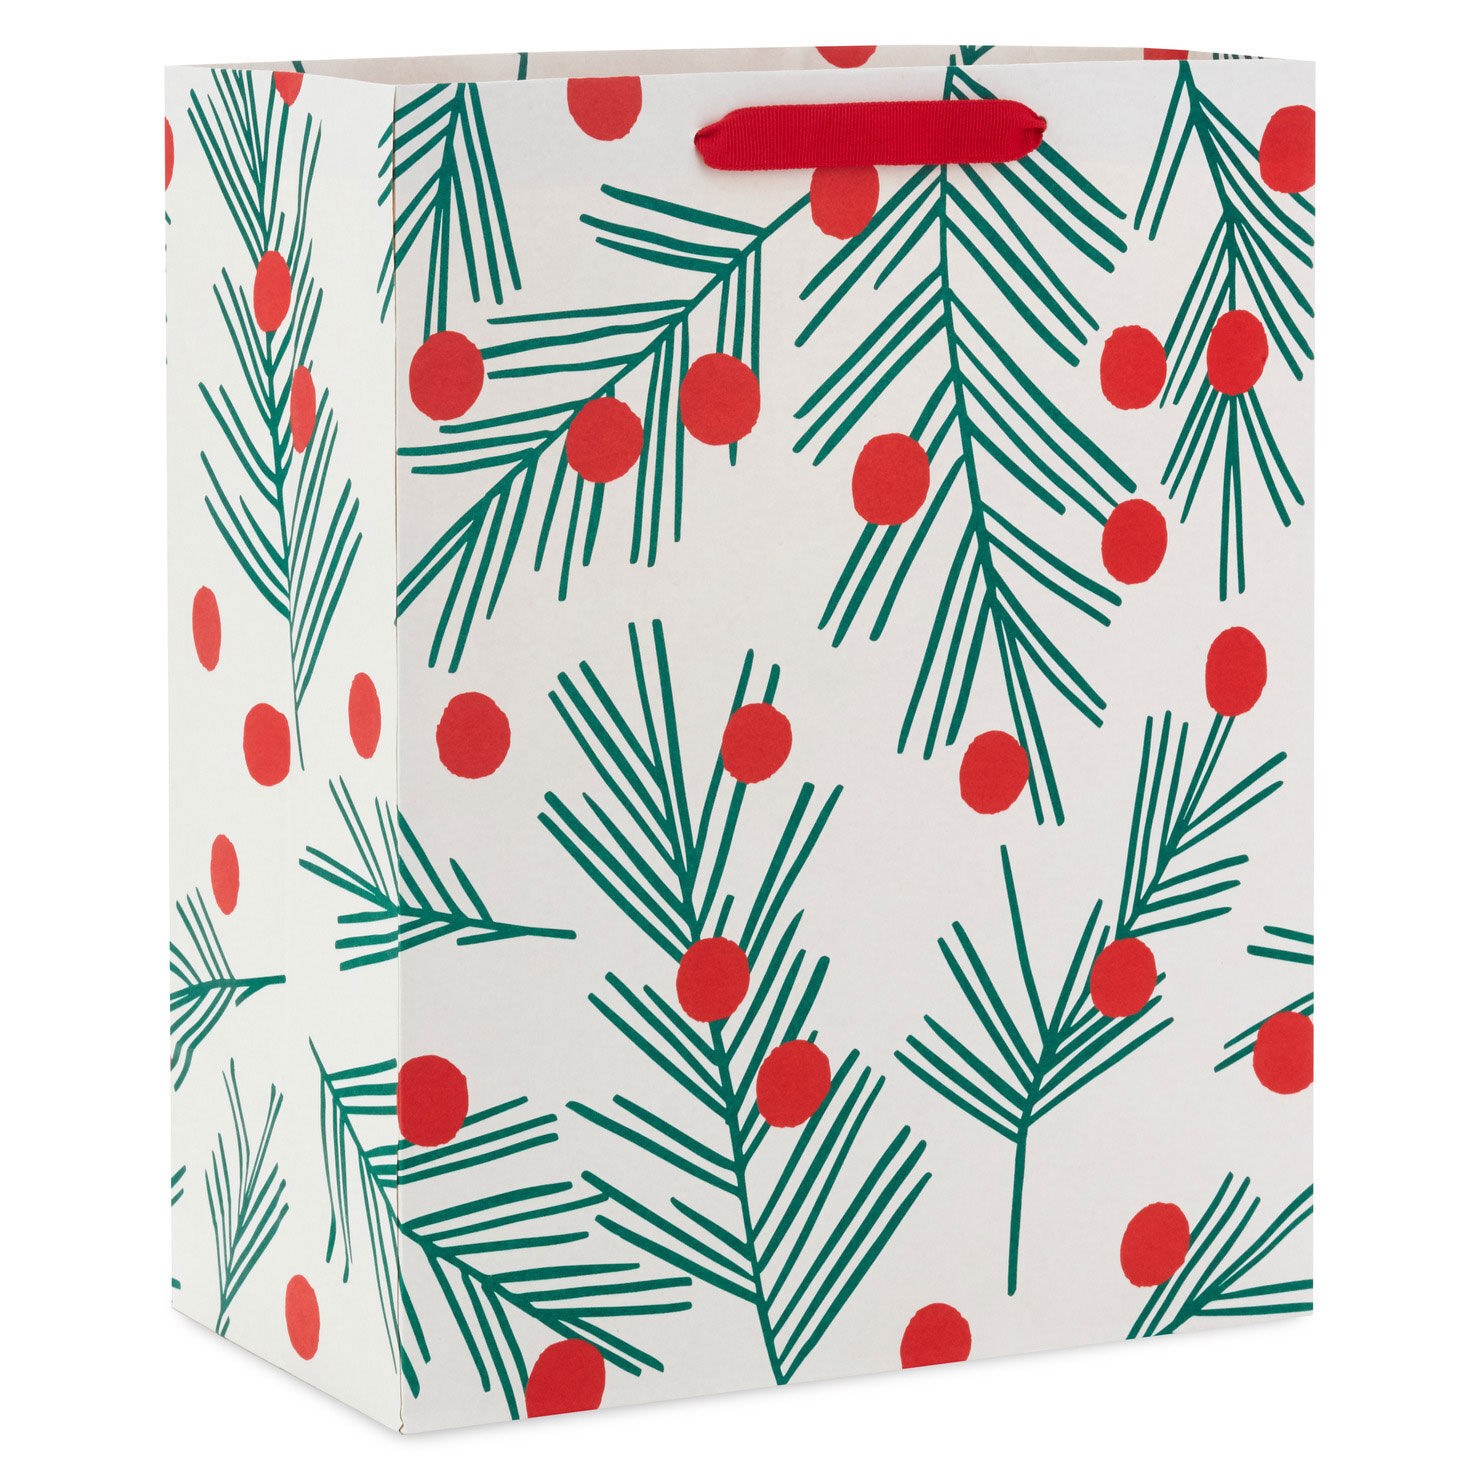 https://www.hallmark.com/dw/image/v2/AALB_PRD/on/demandware.static/-/Sites-hallmark-master/default/dw36e35ea1/images/finished-goods/products/1XGB8338/Pine-Branches-and-Berries-Large-Holiday-Gift-Bag_1XGB8338_01.jpg?sfrm=jpg